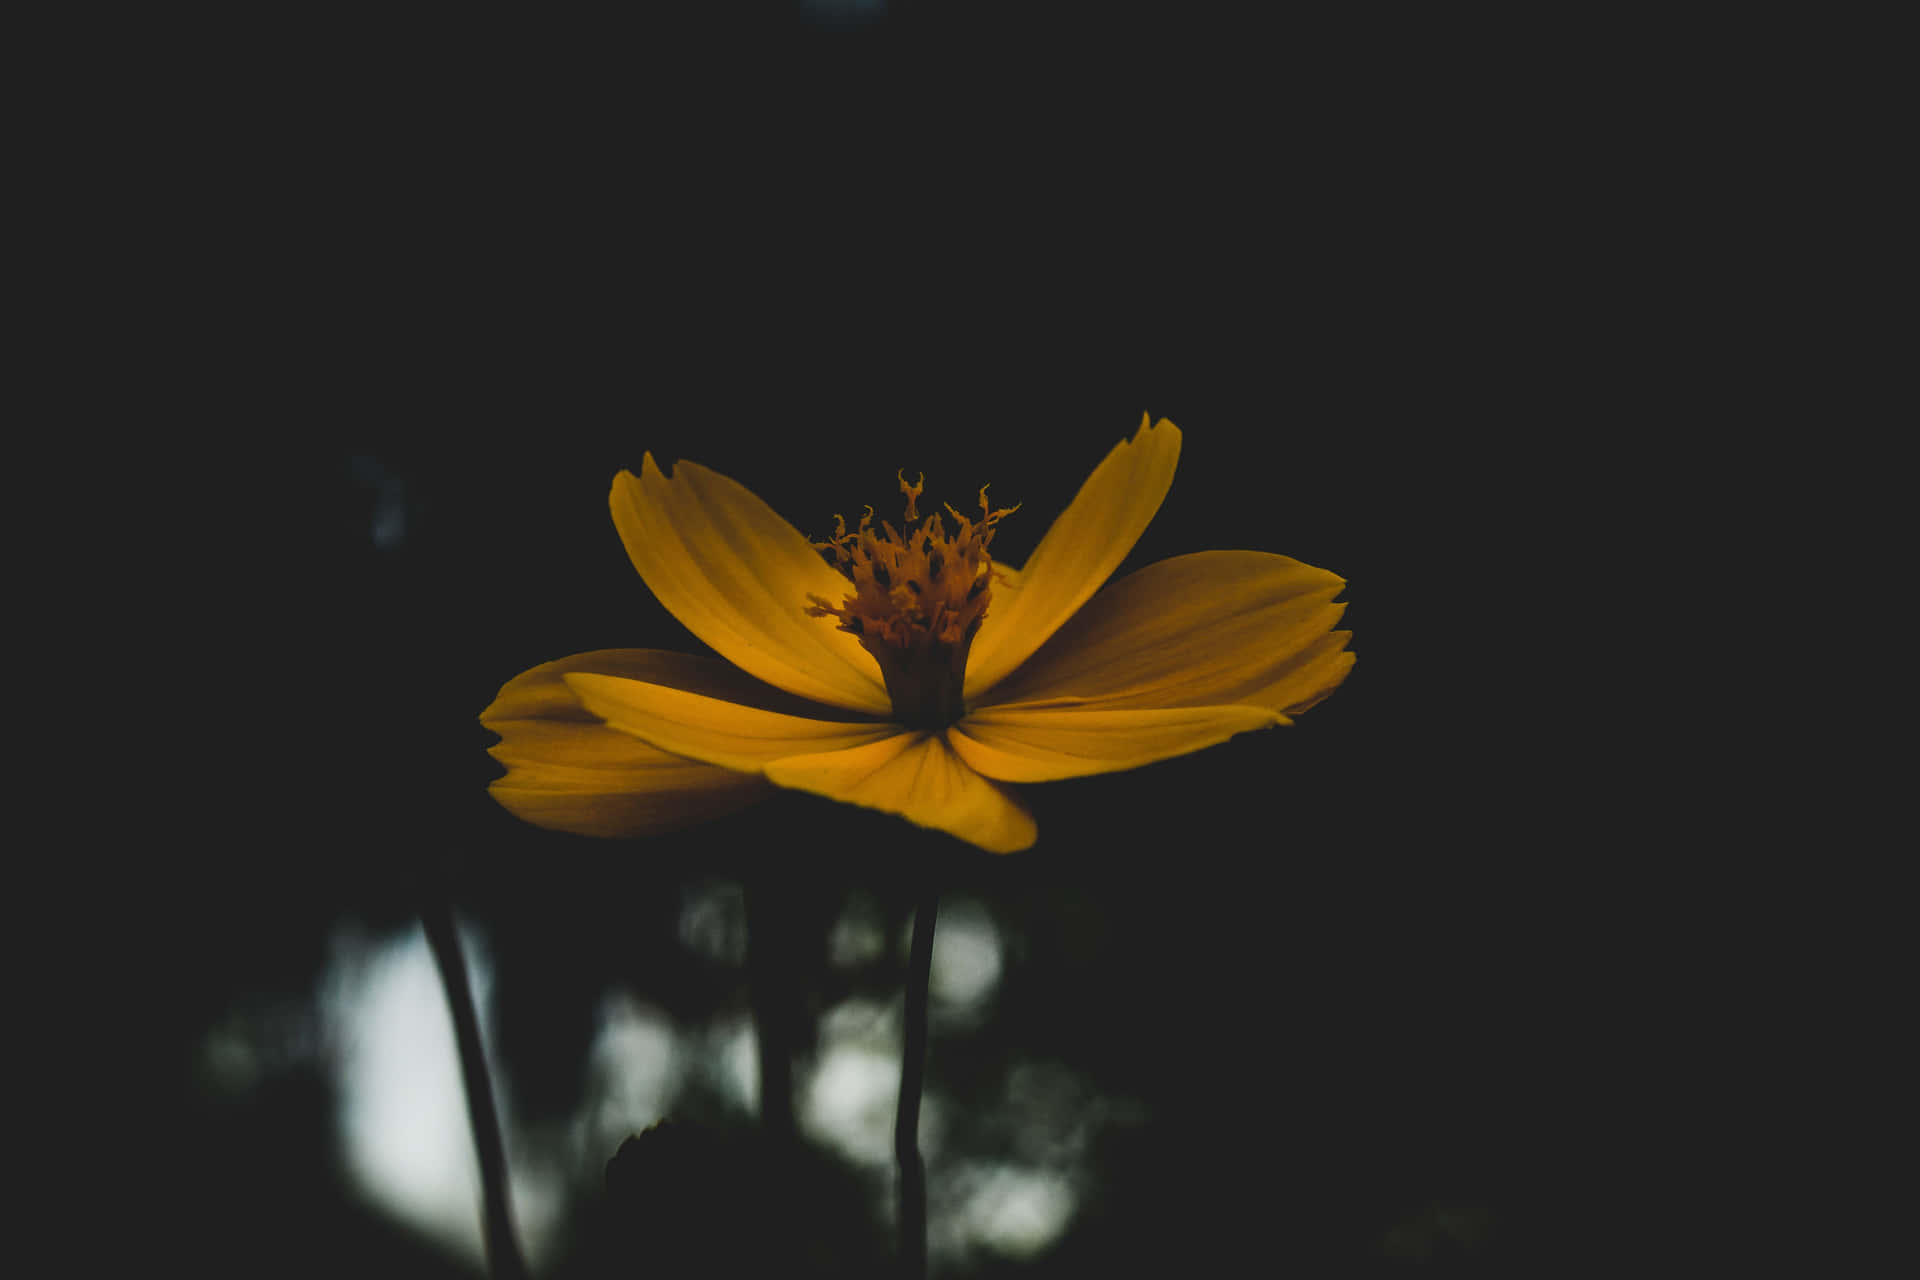 A Yellow Flower In The Dark